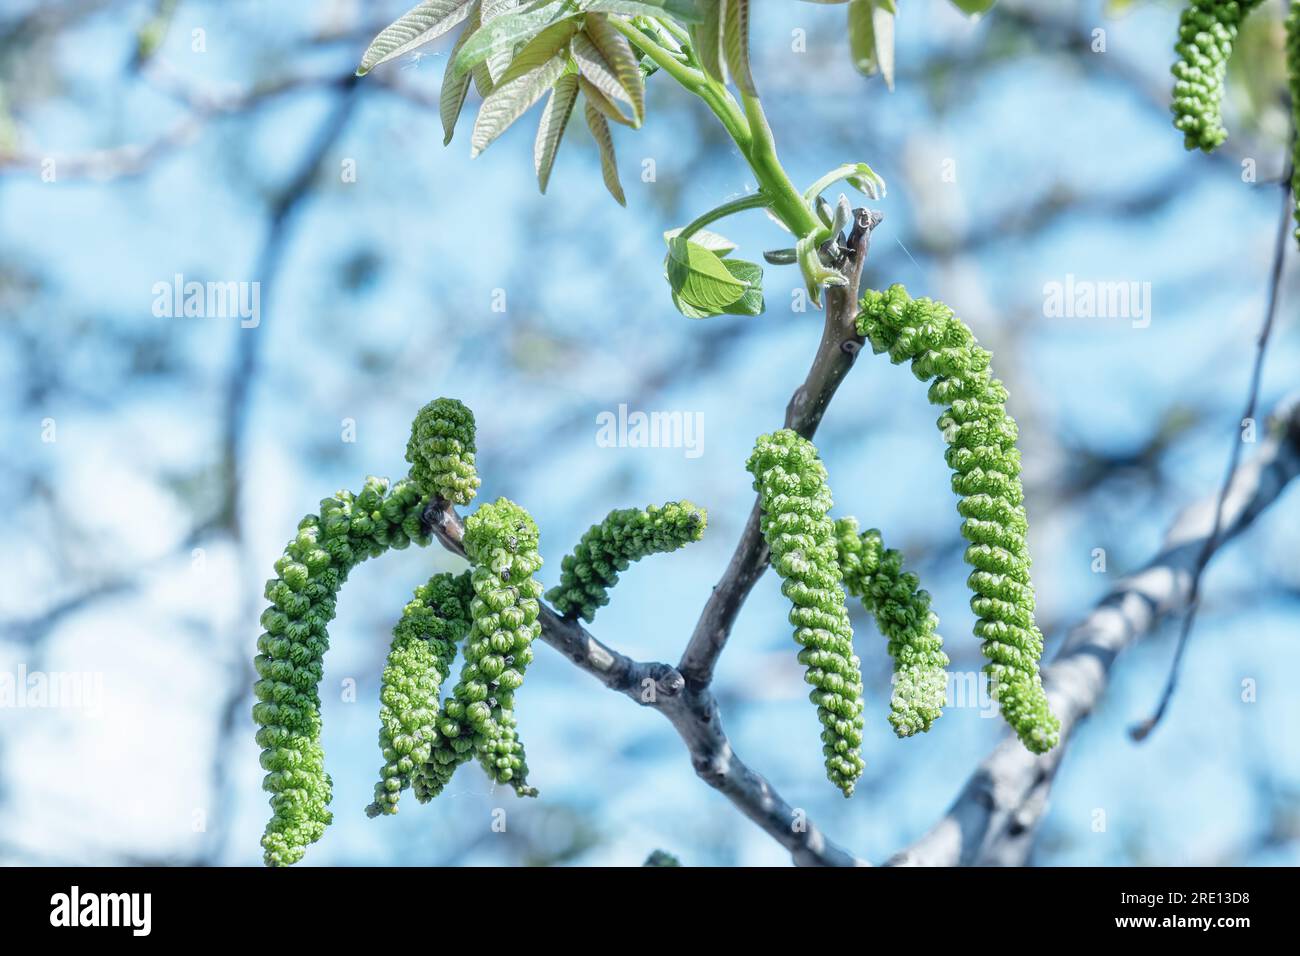 Walnuts blossoms tree in spring light garden close up. Closeup Juglans regia blooming branch by blurry blue sky background. Male flowers and young lea Stock Photo